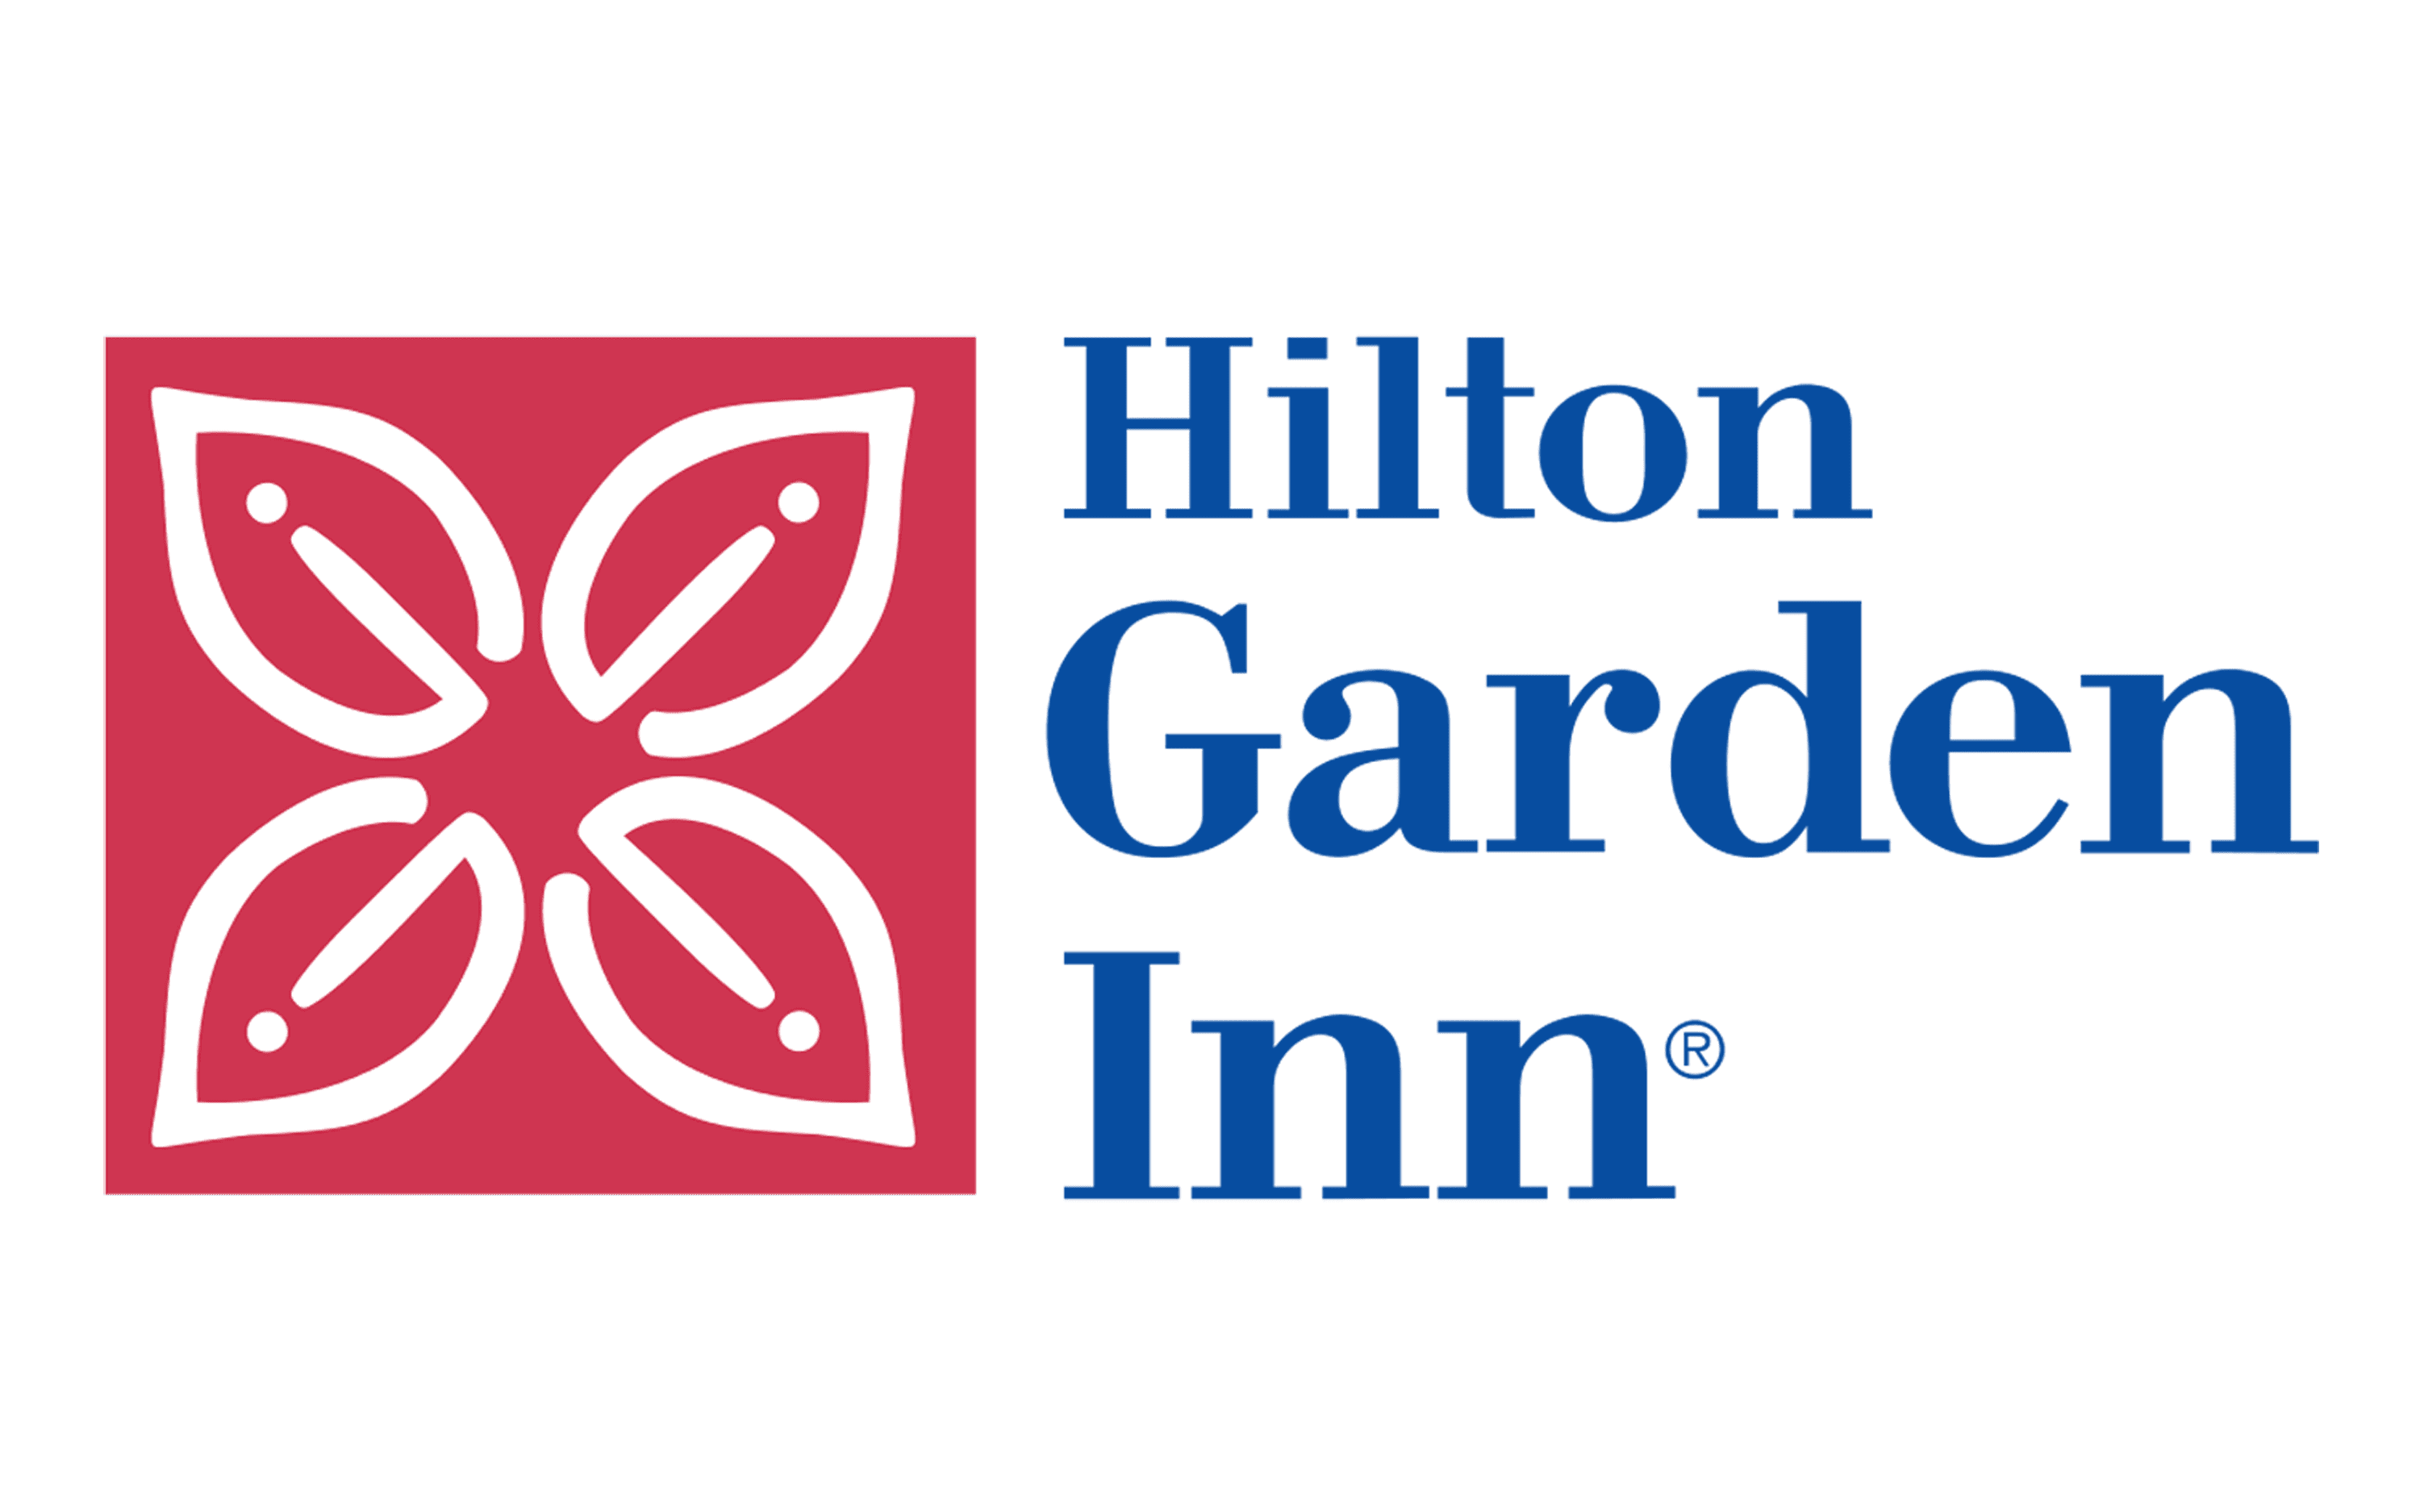 Hilton Garden Inn Logo And Symbol Meaning History Png